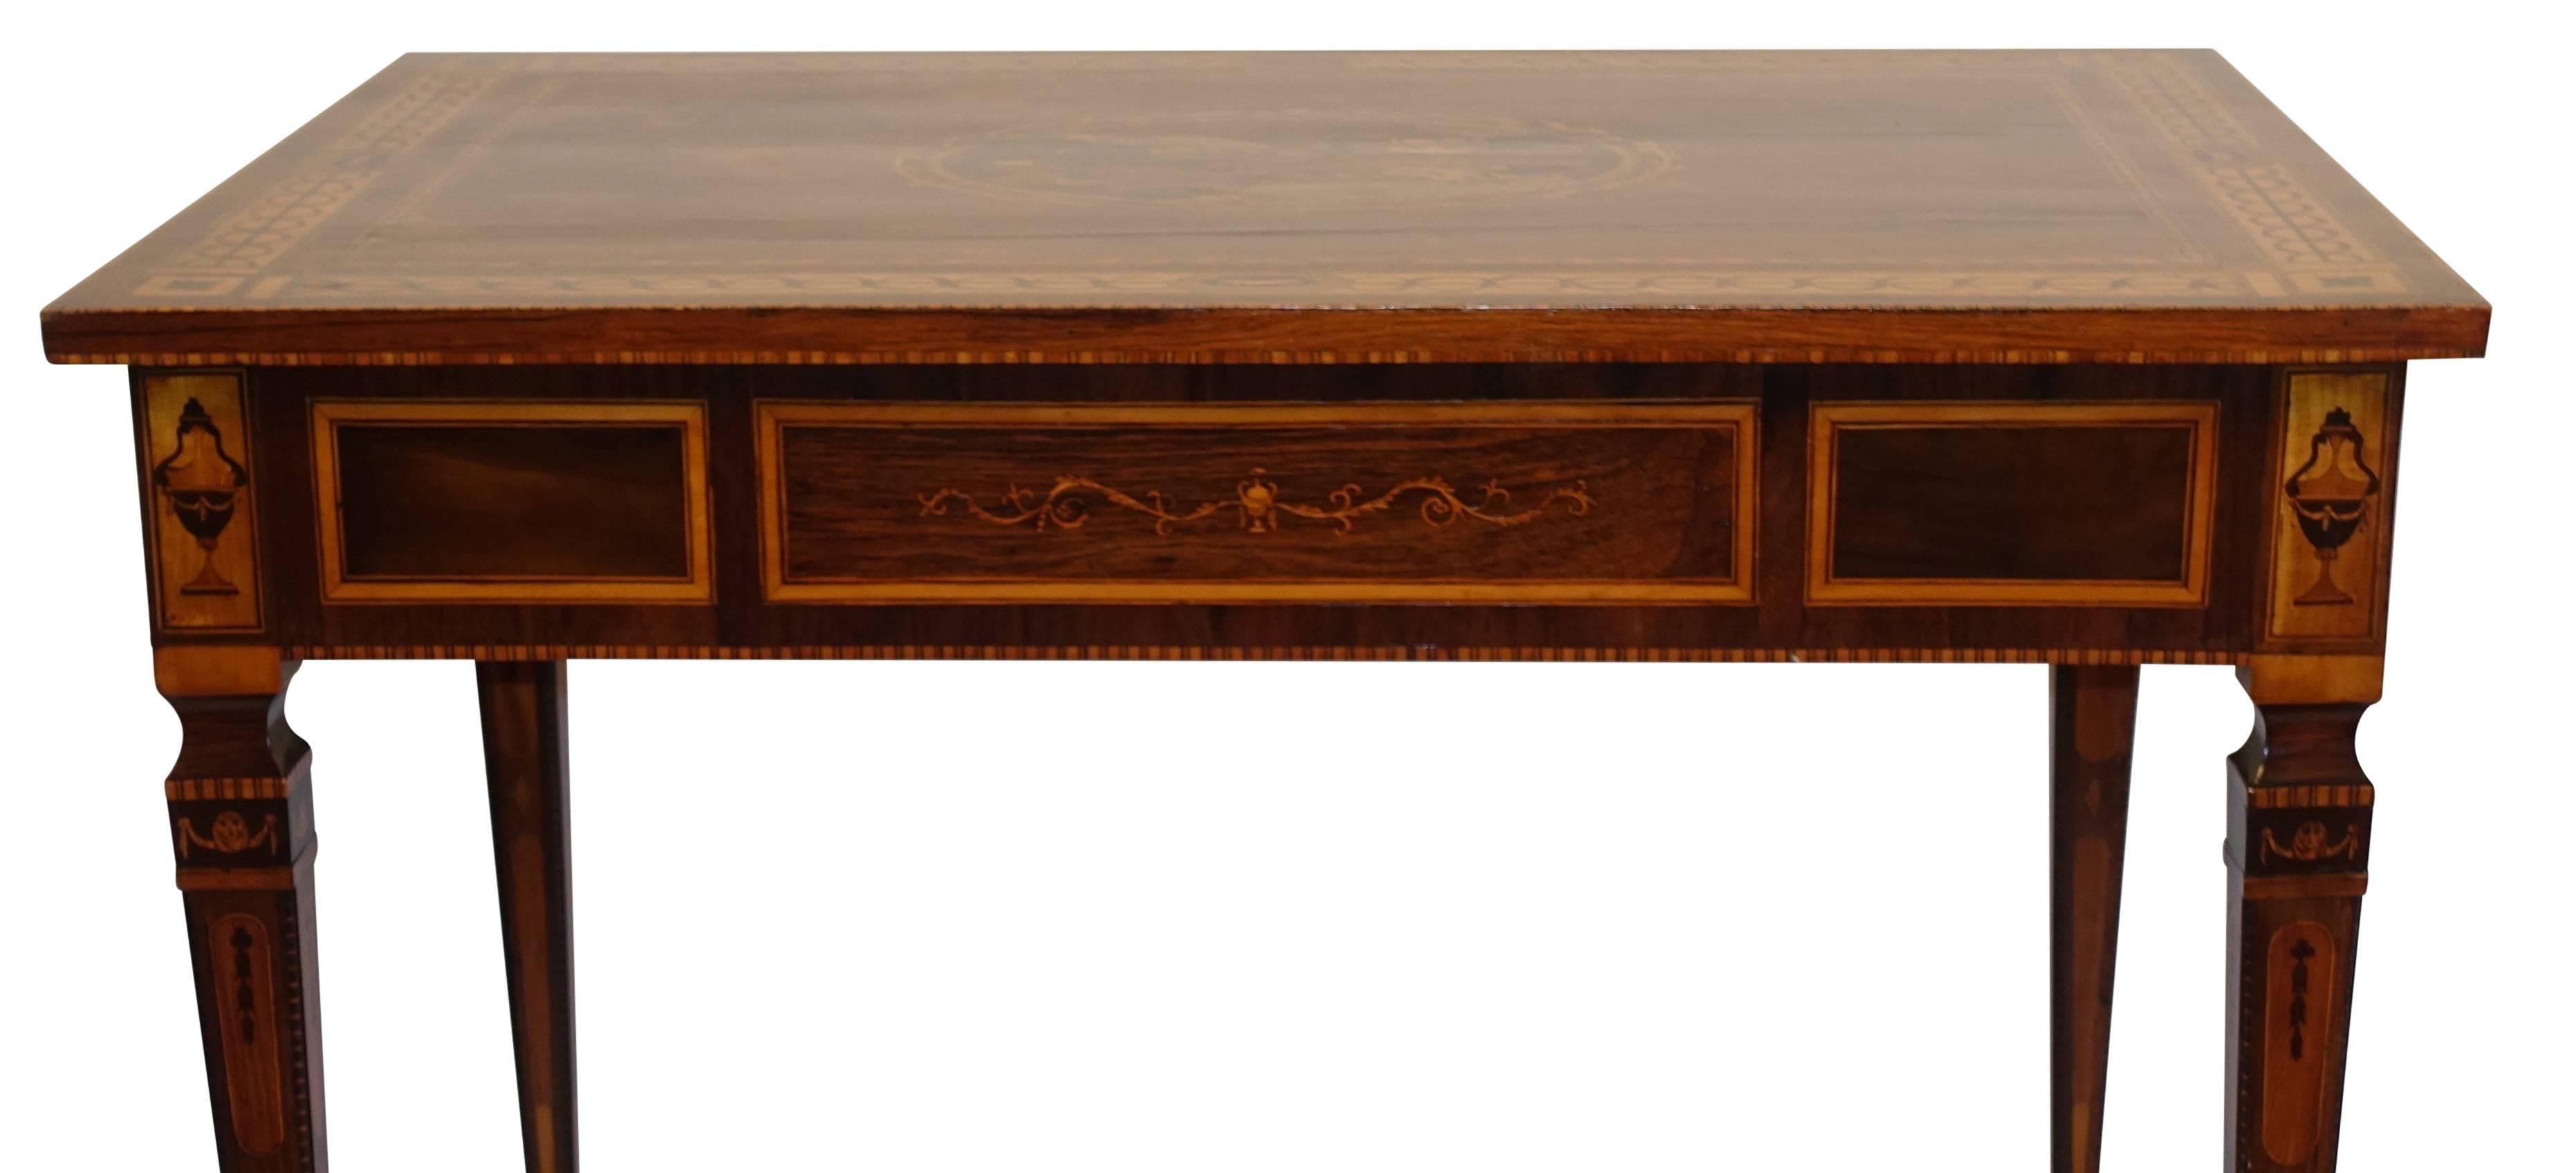 Mixed Woods Marquetry Inlaid Writing Table, Northern Italian, Late 18th Century For Sale 1